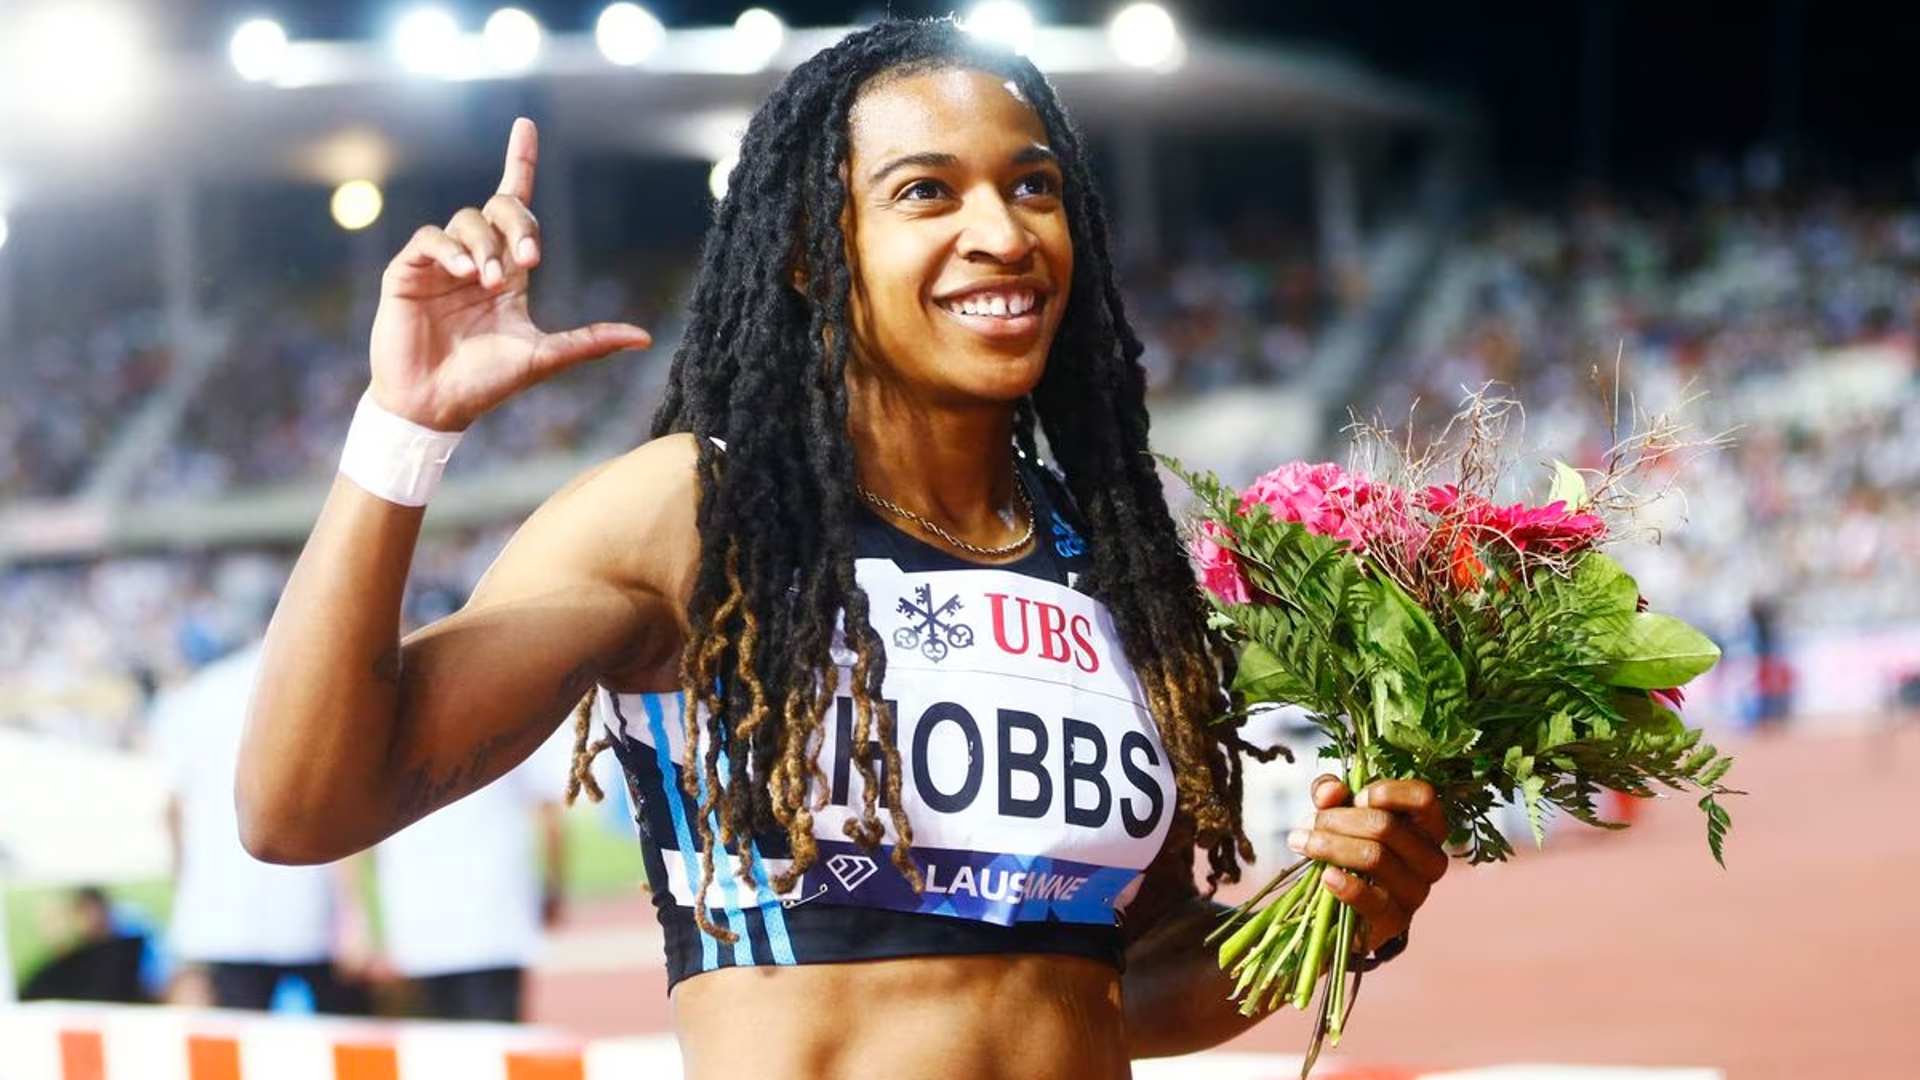 USA's Aleia Hobbs at a meeting in Lausanne (Image Credits - World Athletics)